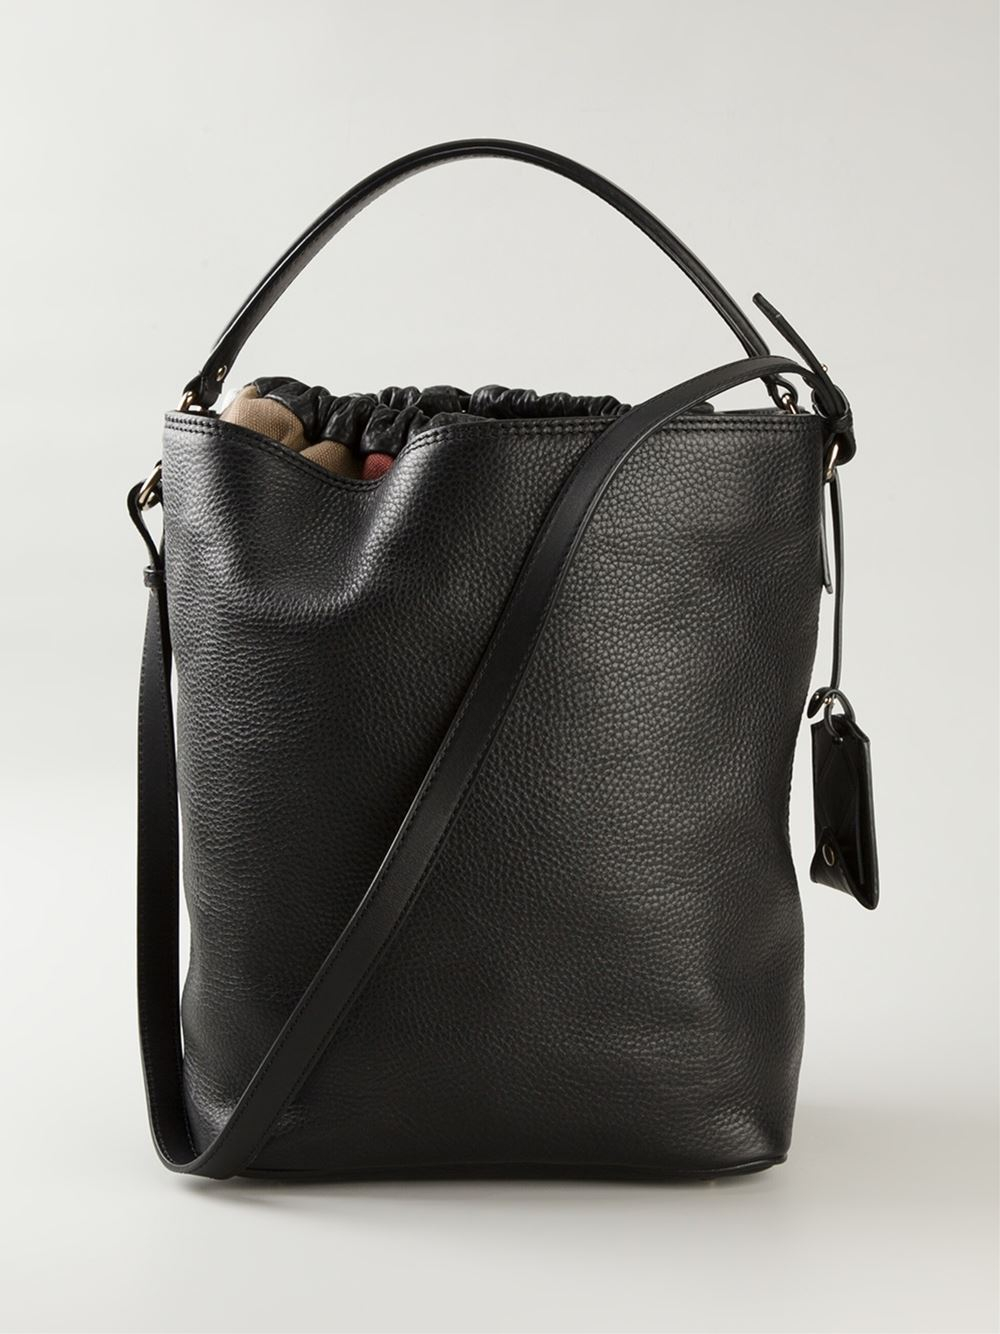 Burberry The Bucket Calf-Leather Shoulder Bag in Black - Lyst